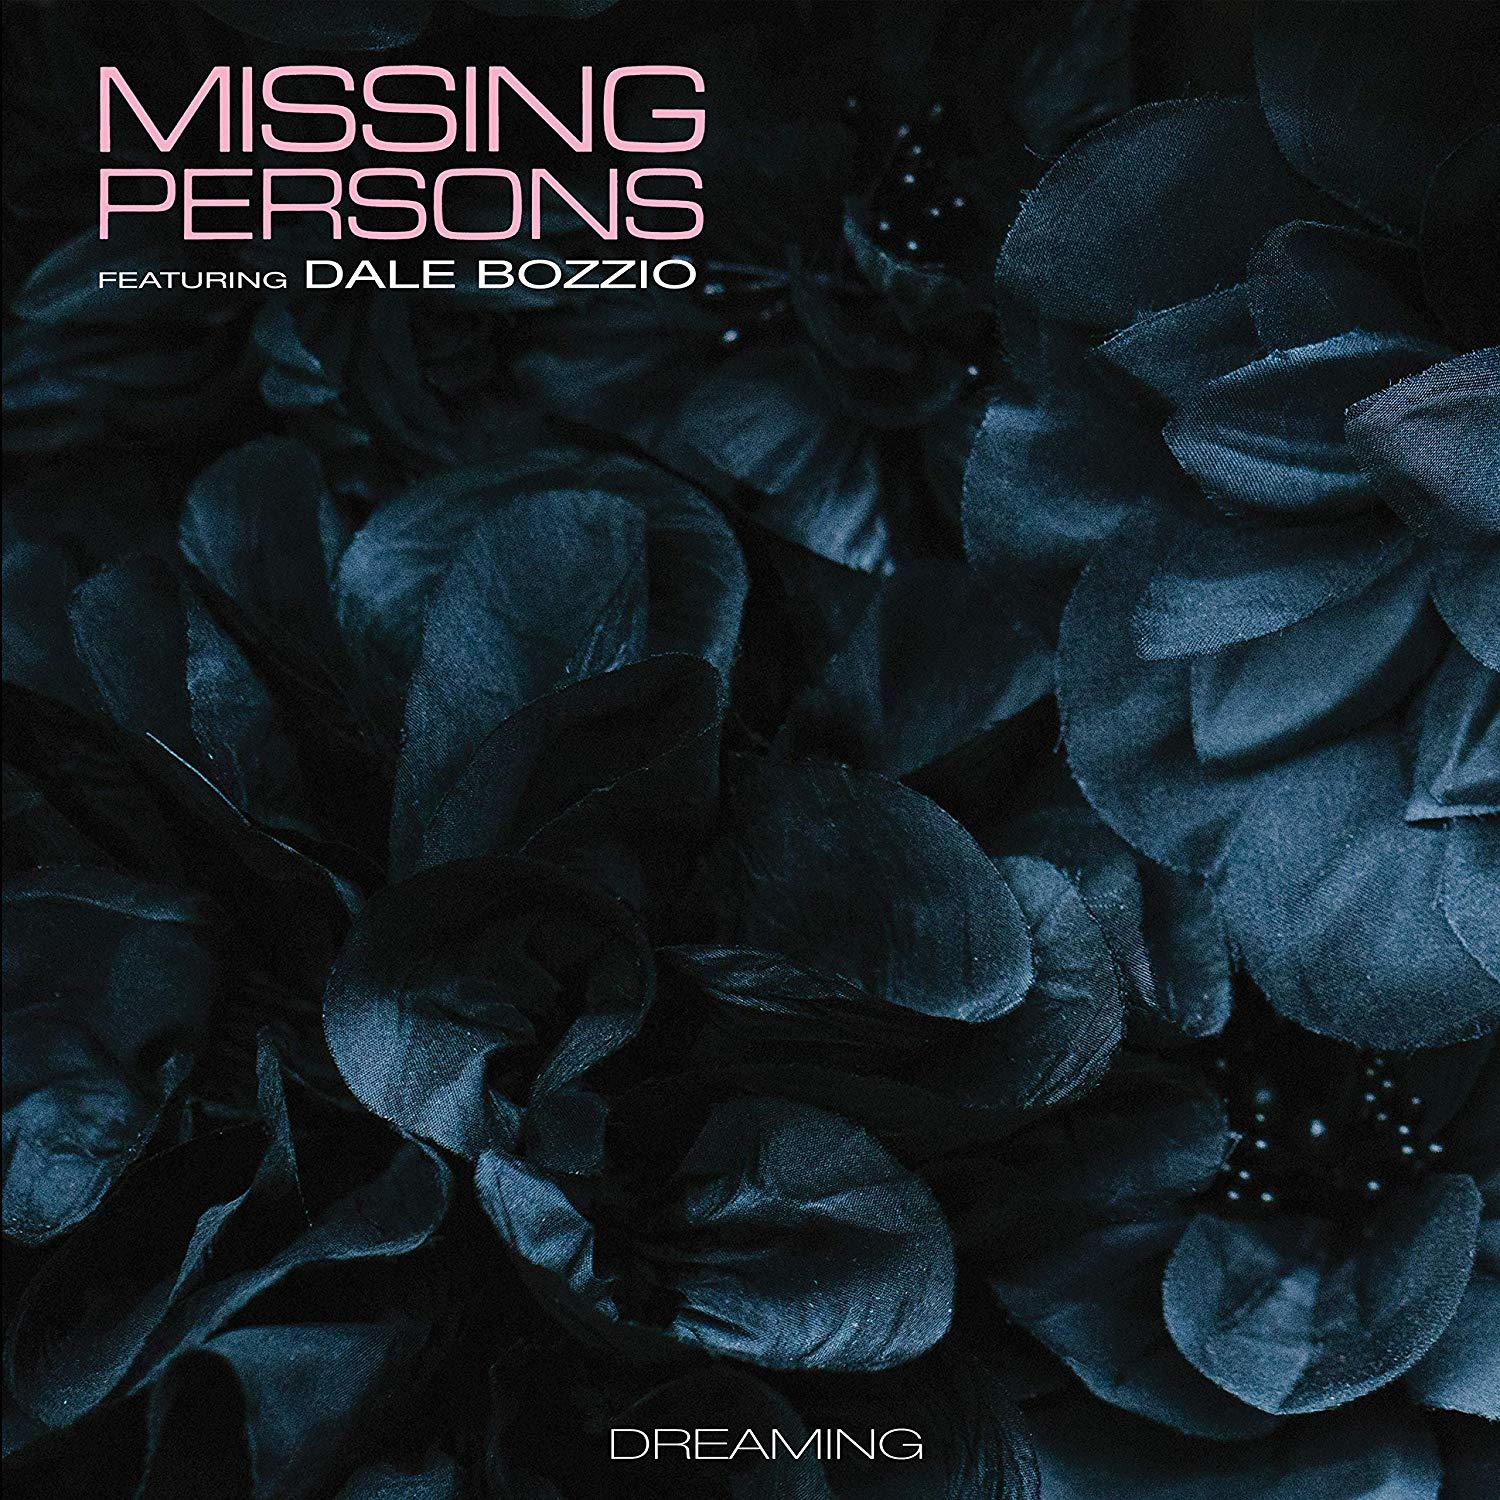 PERSONS - DALE (CD) - BOZZIO FEAT. MISSING DREAMING